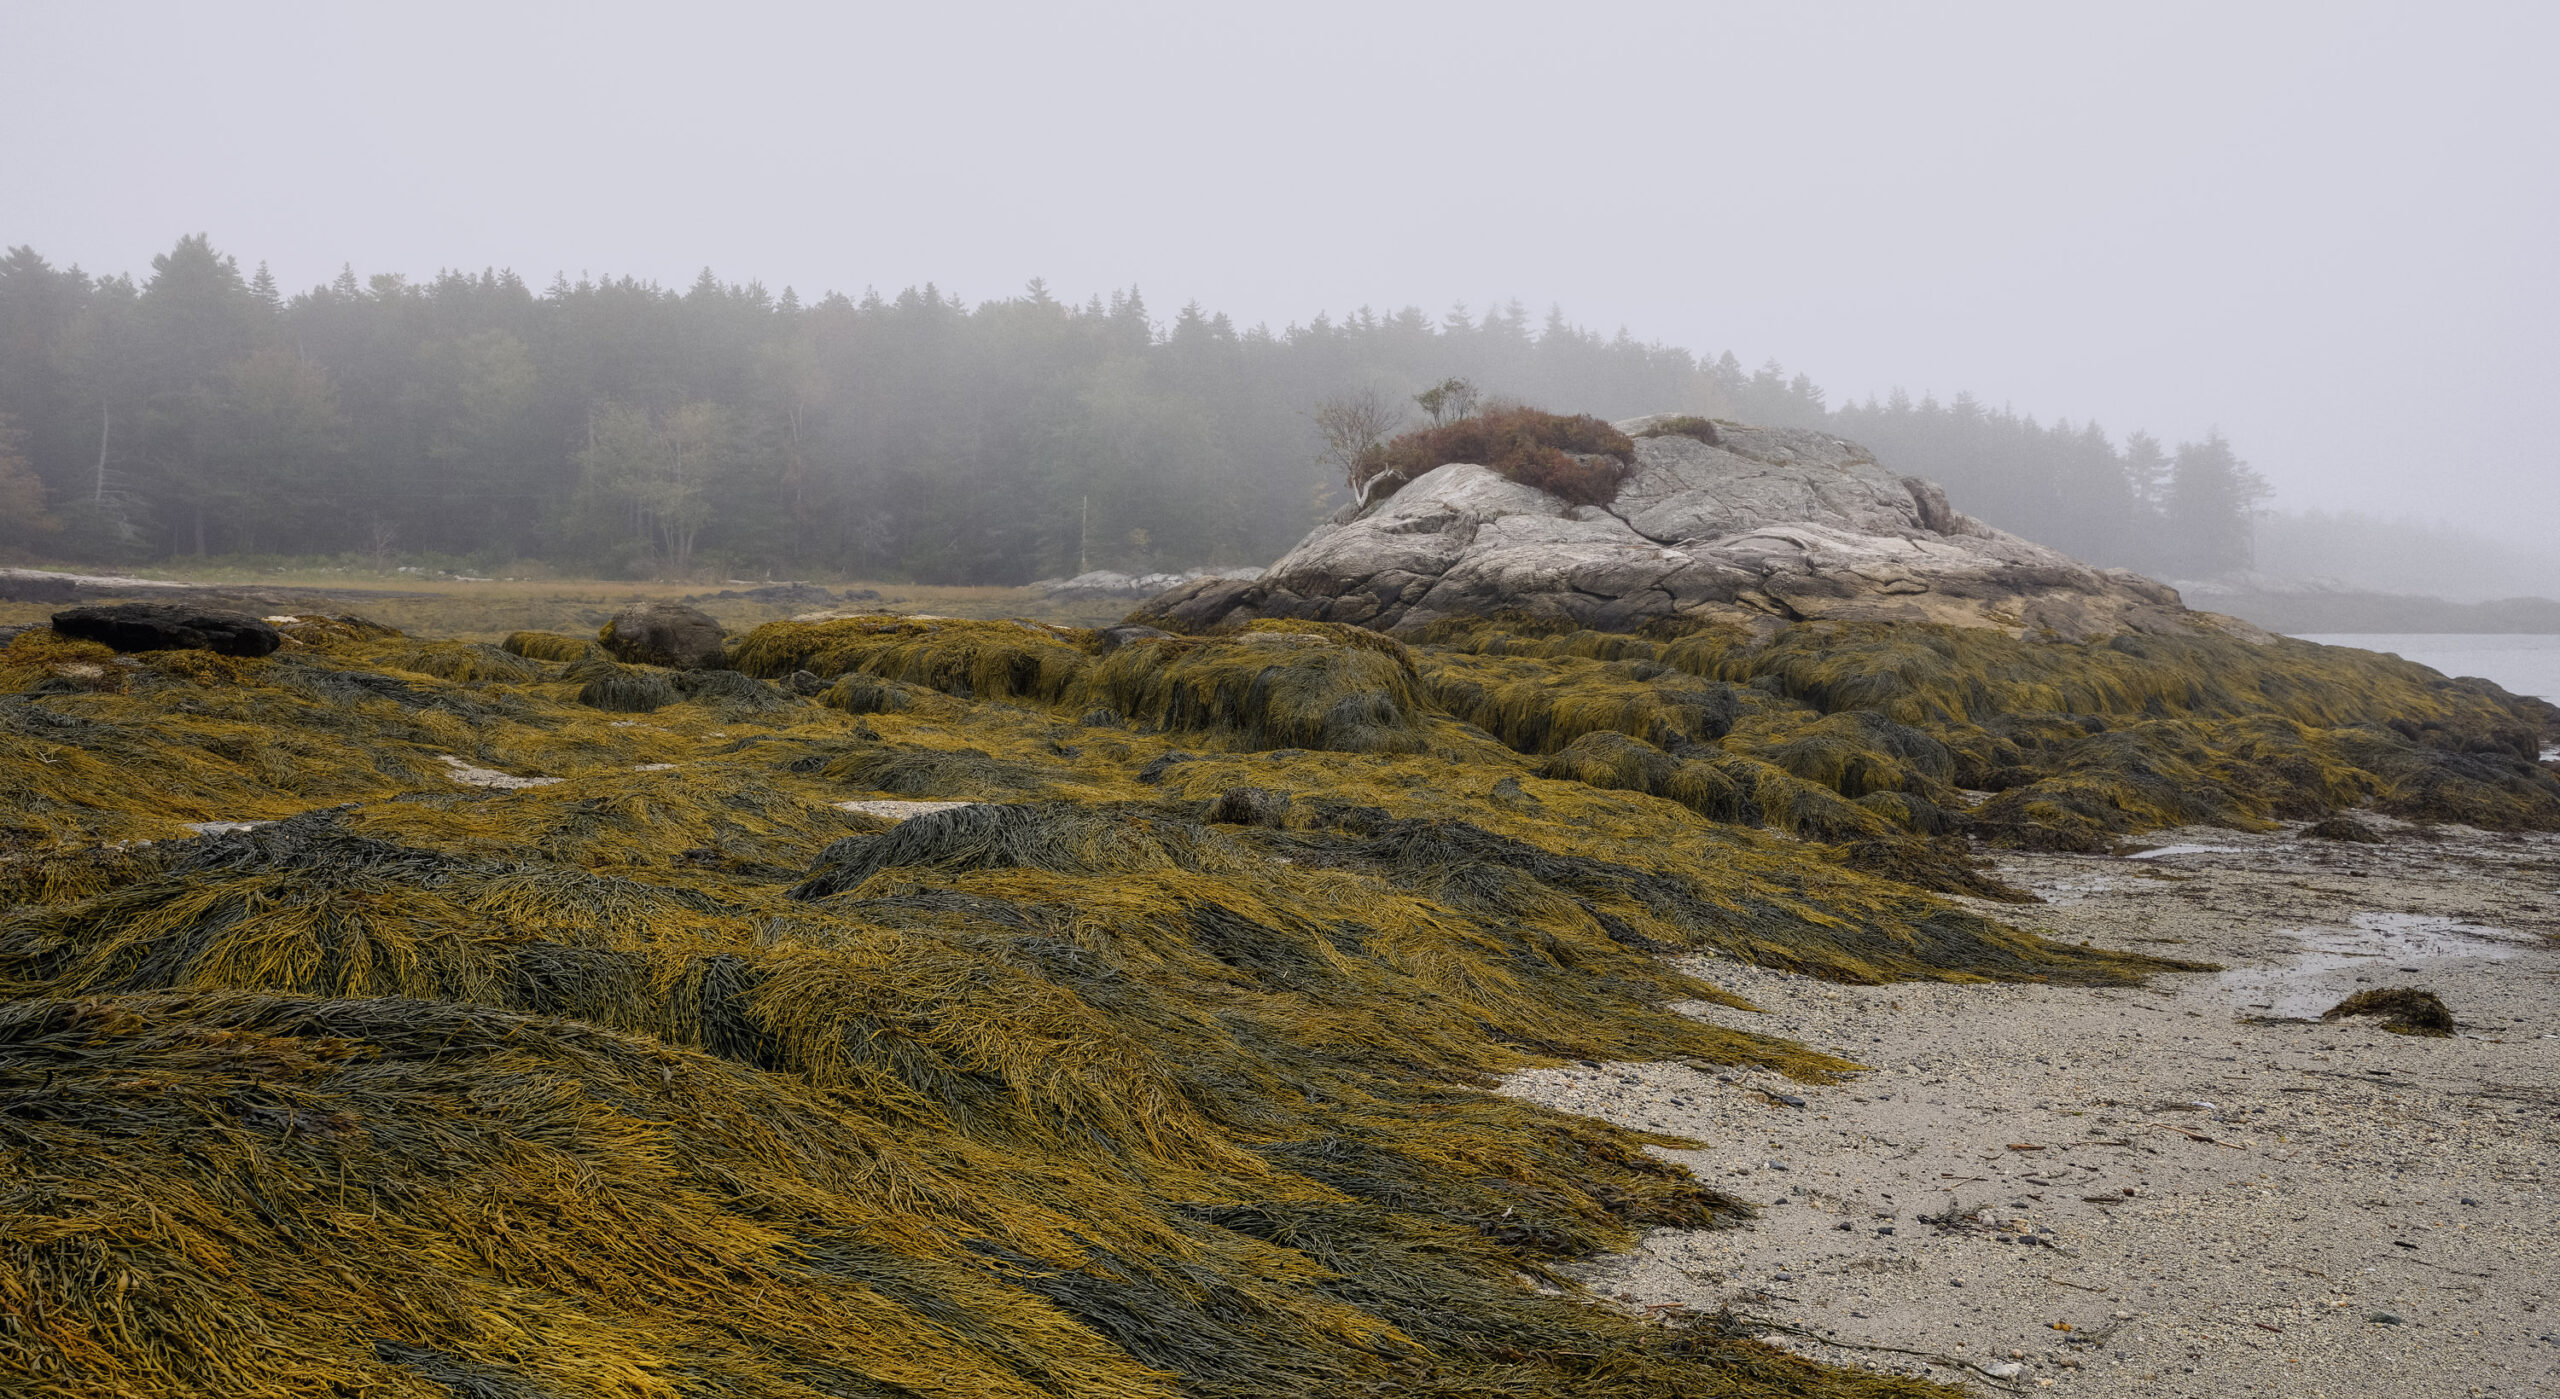 kelp beds at low tide in Maine